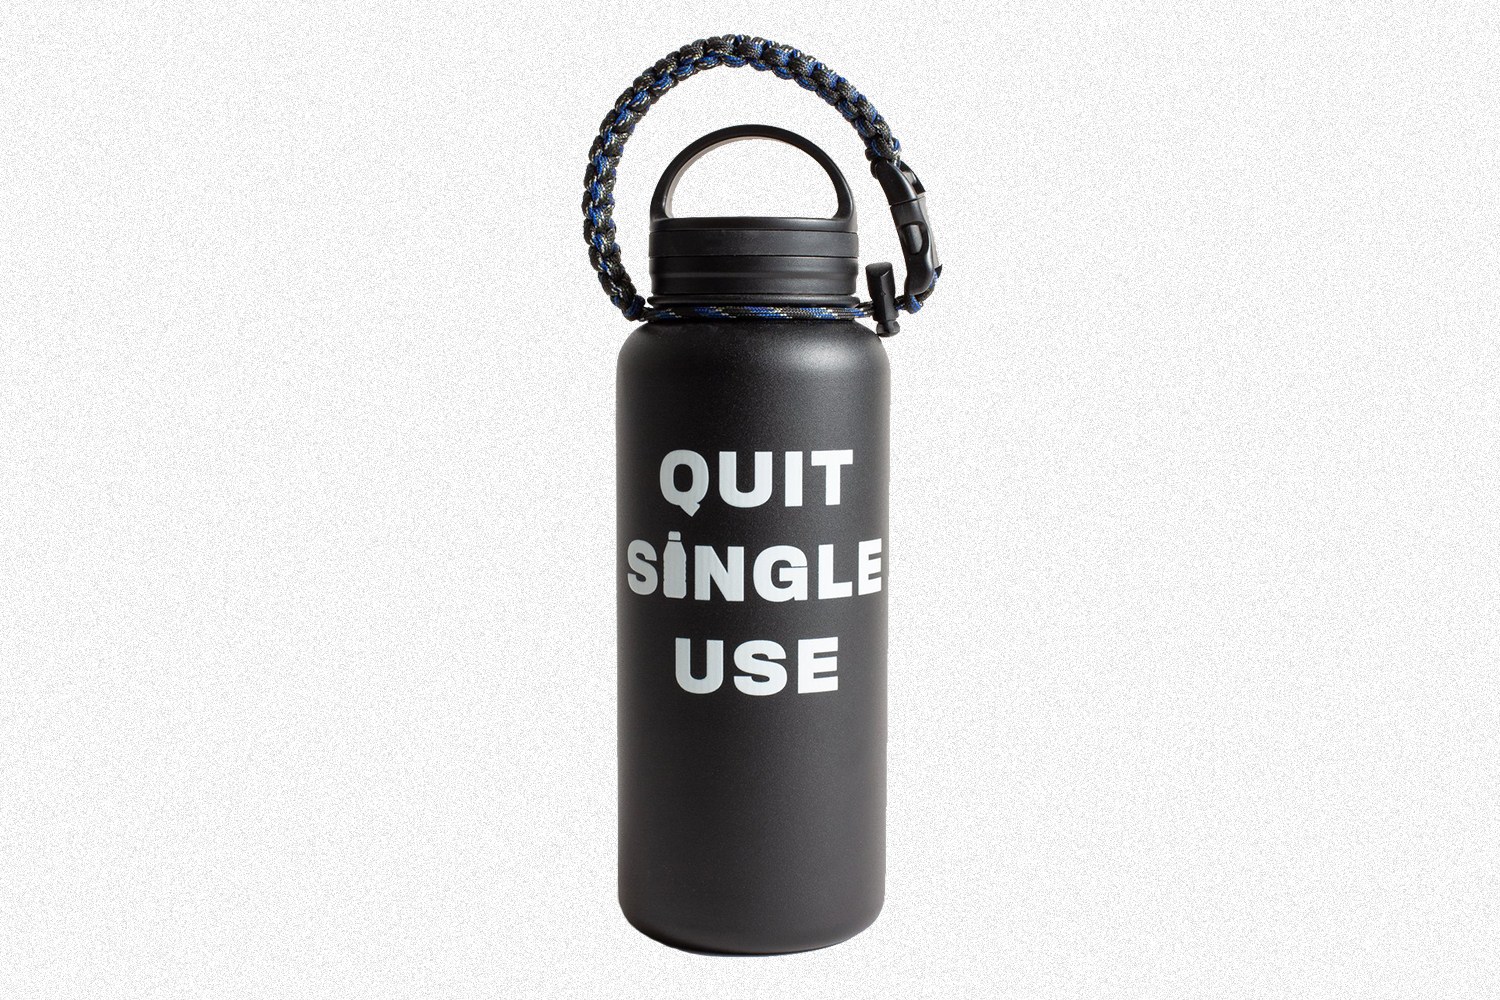 Quit Single Use 32 oz. Insulated Water Bottle from United by Blue and REI